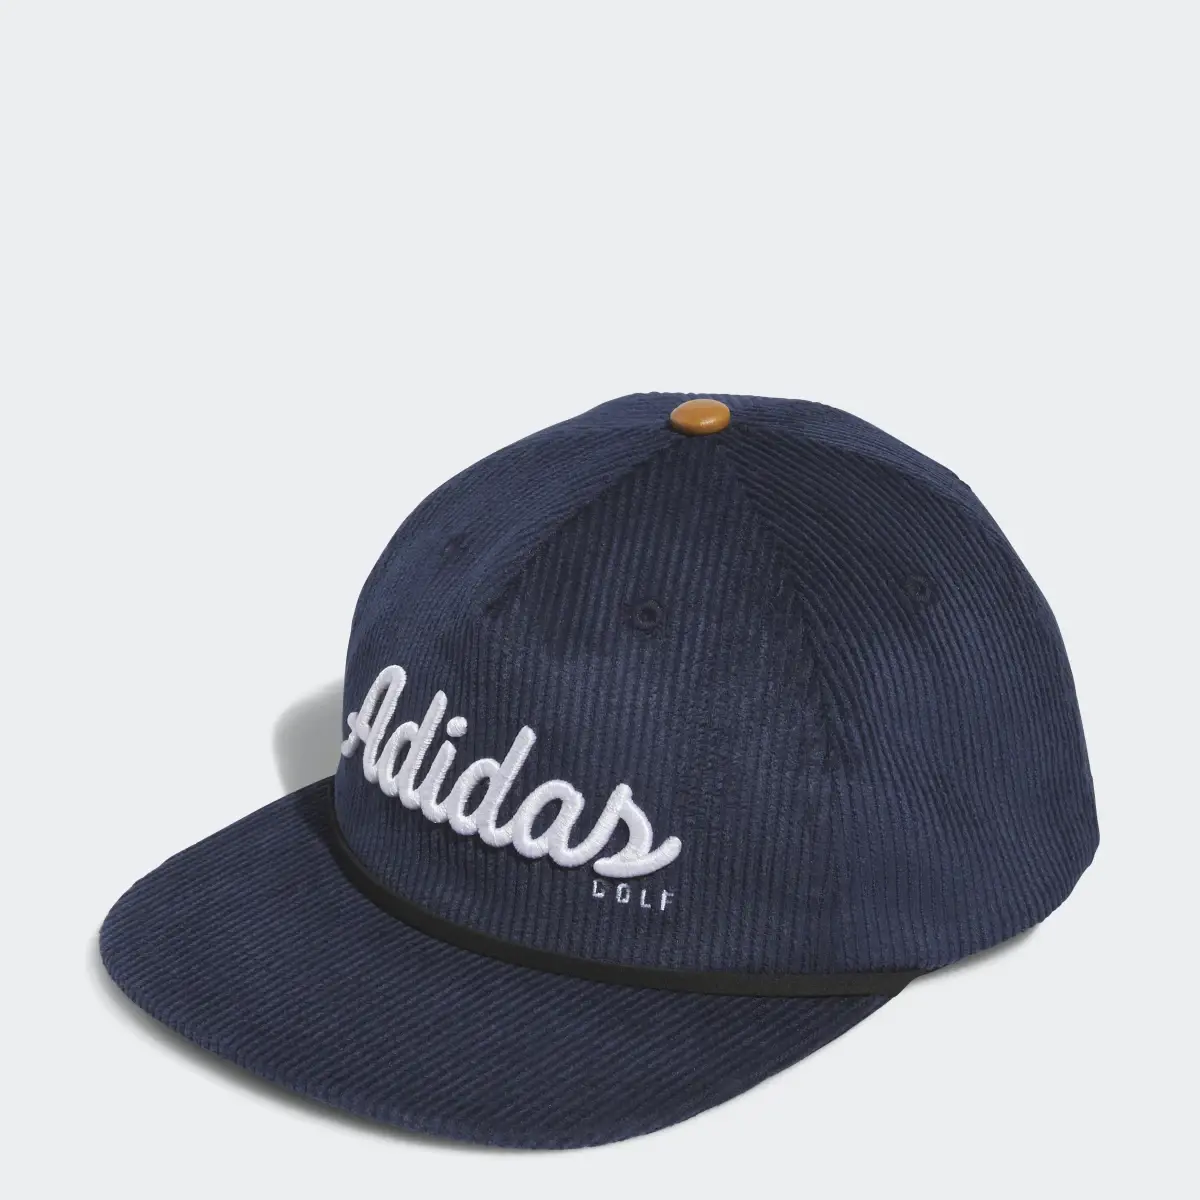 Adidas Corduroy Leather Five-Panel Rope Golf Hat. 1